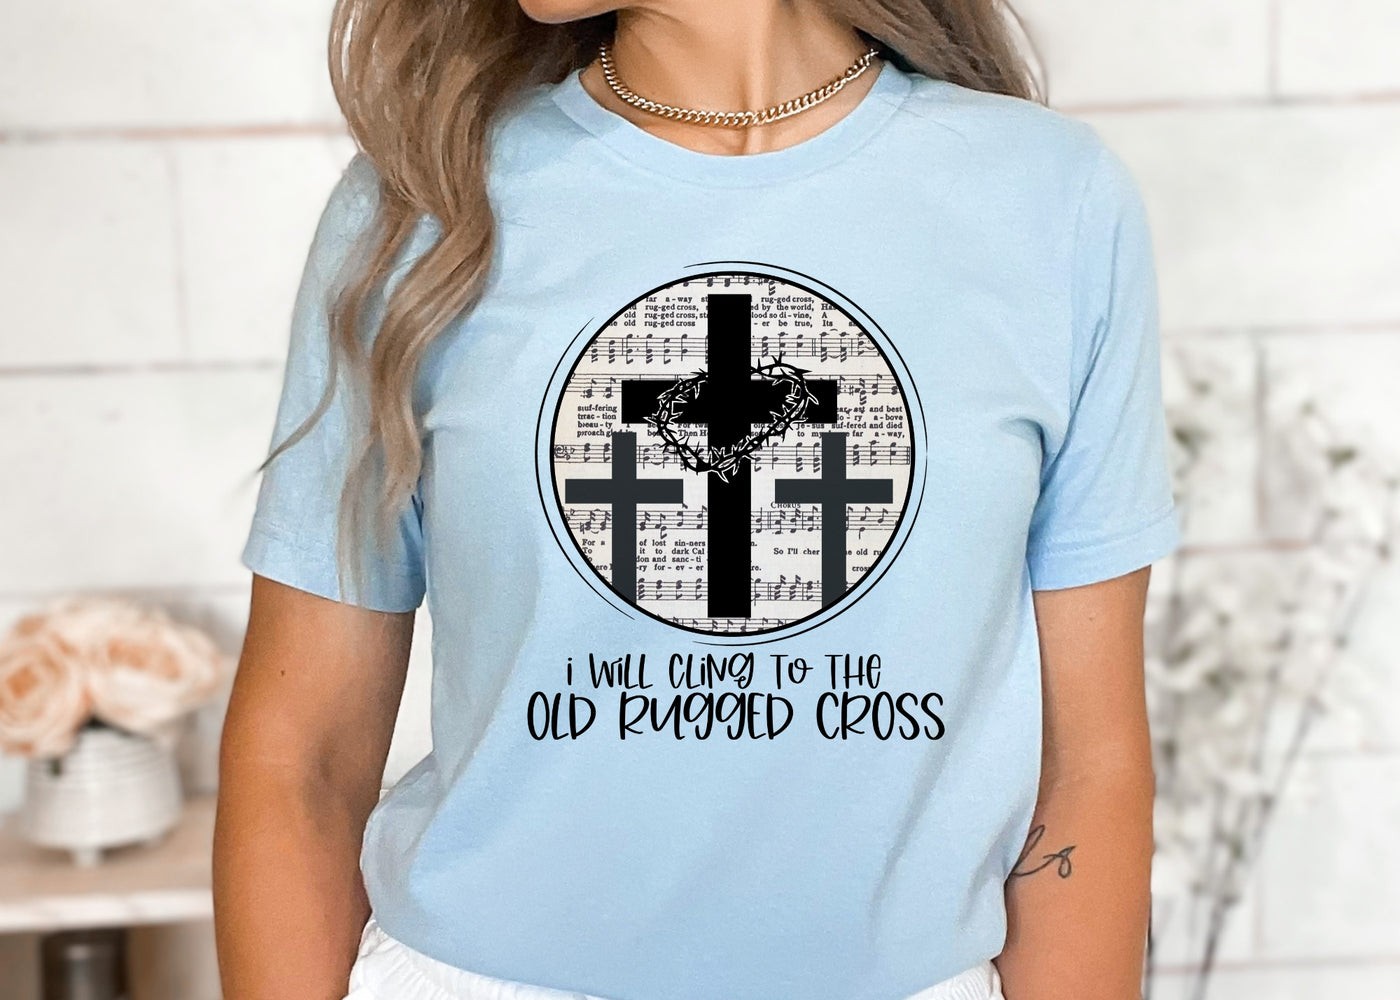 I will cling to the old rugged cross